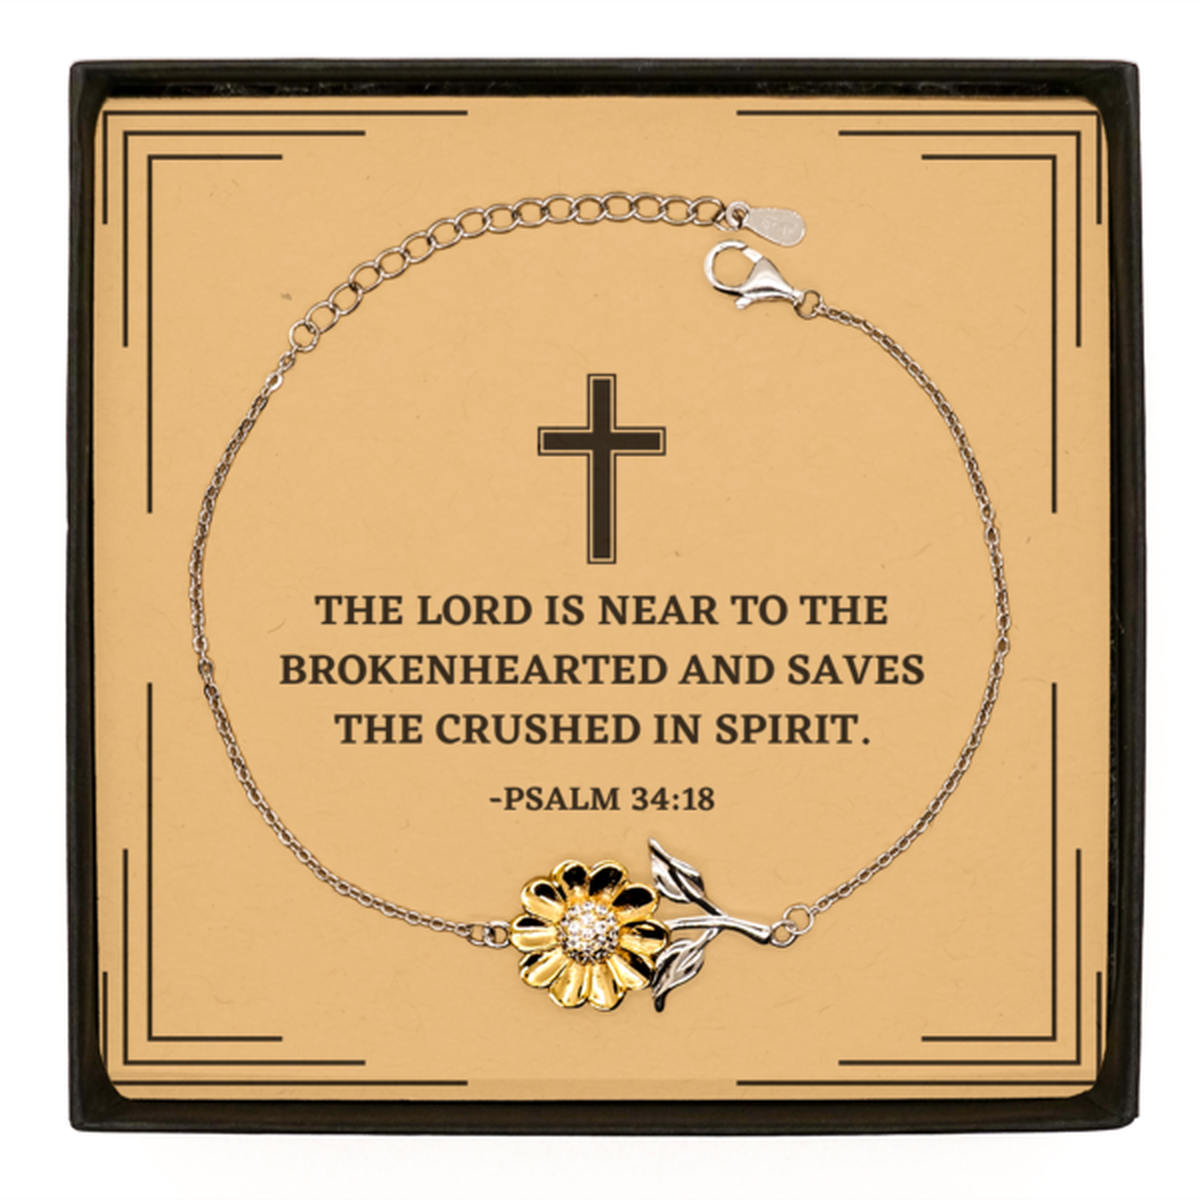 Baptism Gifts For Teenage Boys Girls, Christian Bible Verse Sterling Silver Sunflower Bracelet, The Lord is near to the brokenhearted, Confirmation Gifts, Bible Verse Card for Son, Godson, Grandson